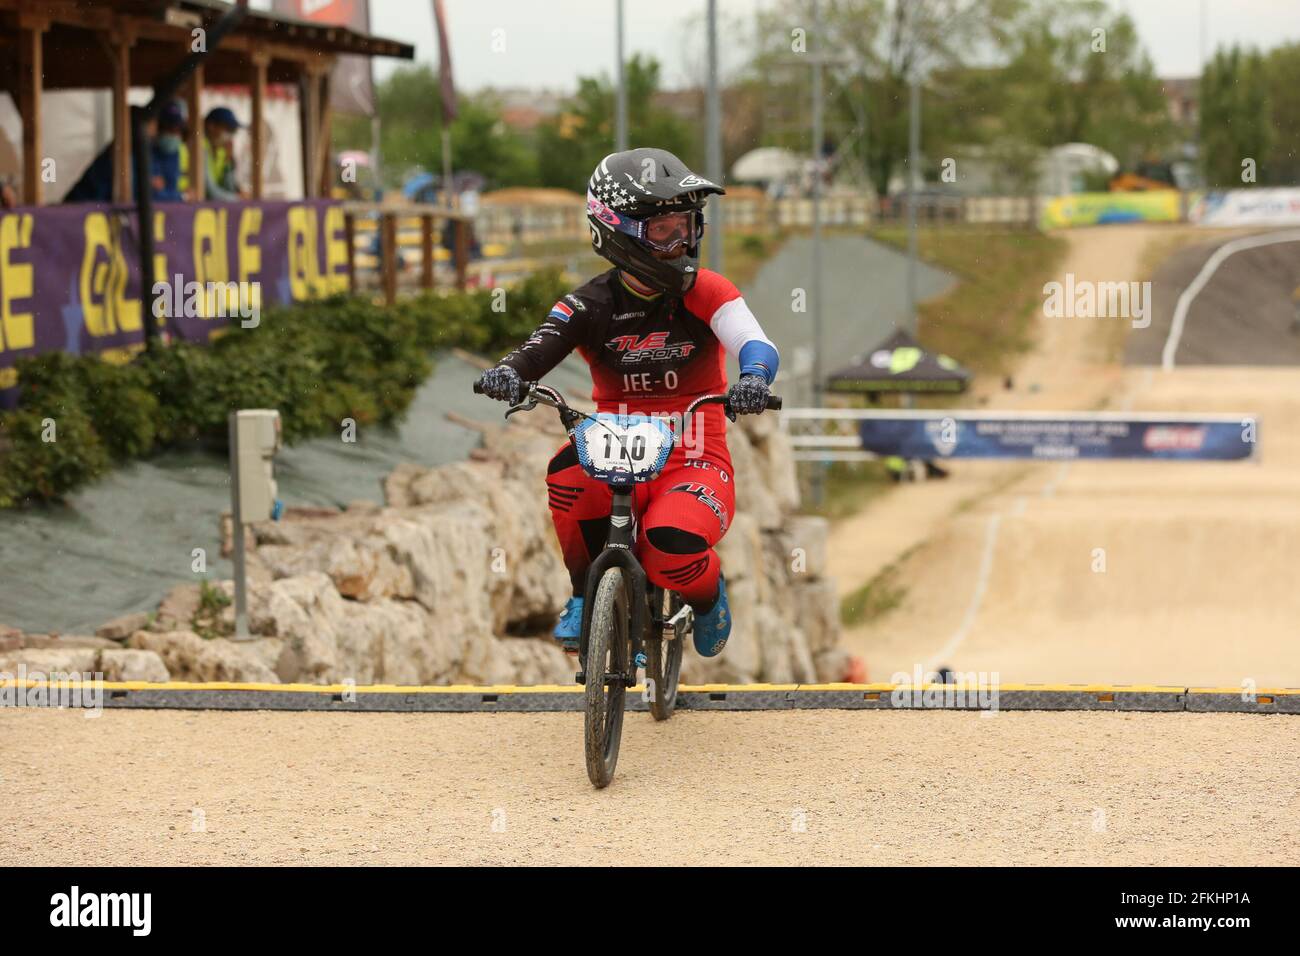 Verona, Italy. 01st May, 2021. Laura SMULDERS of Netherlands (110) competes  in the BMX Racing Women Elite Round 1 of the UEC European Cup at the BMX  Olympic Arena on May 1st